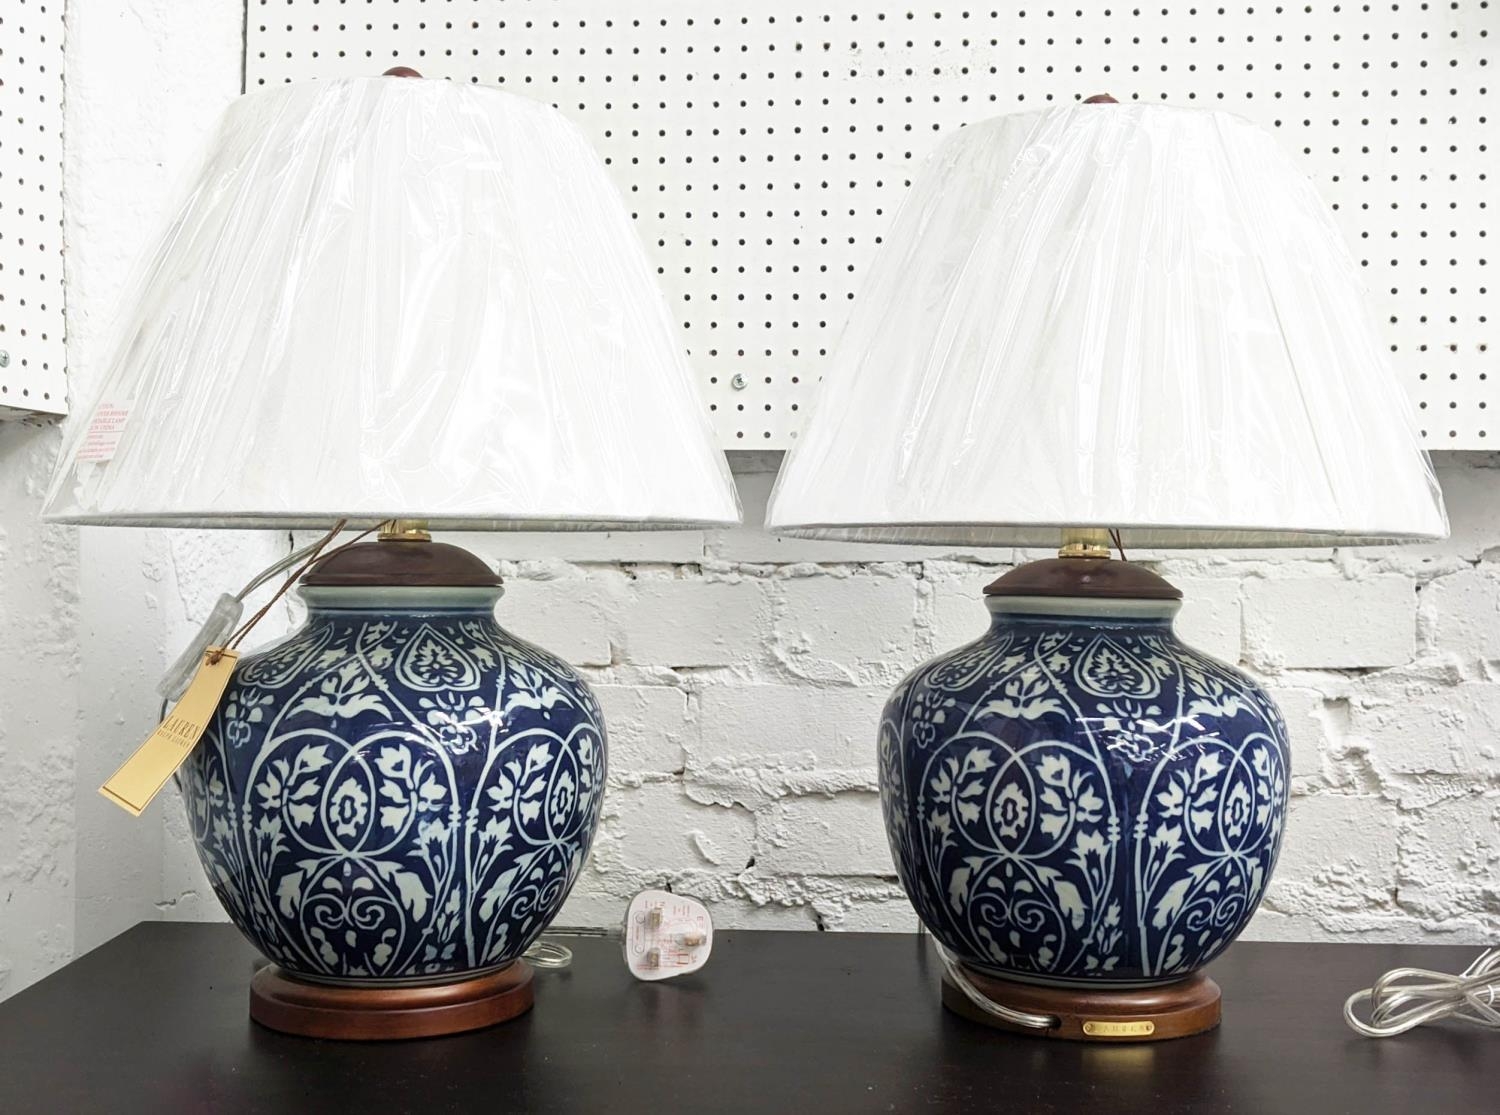 LAUREN RALPH LAUREN TABLE LAMPS, a pair, 51cm H, blue and white ceramic,  with shades. (2)